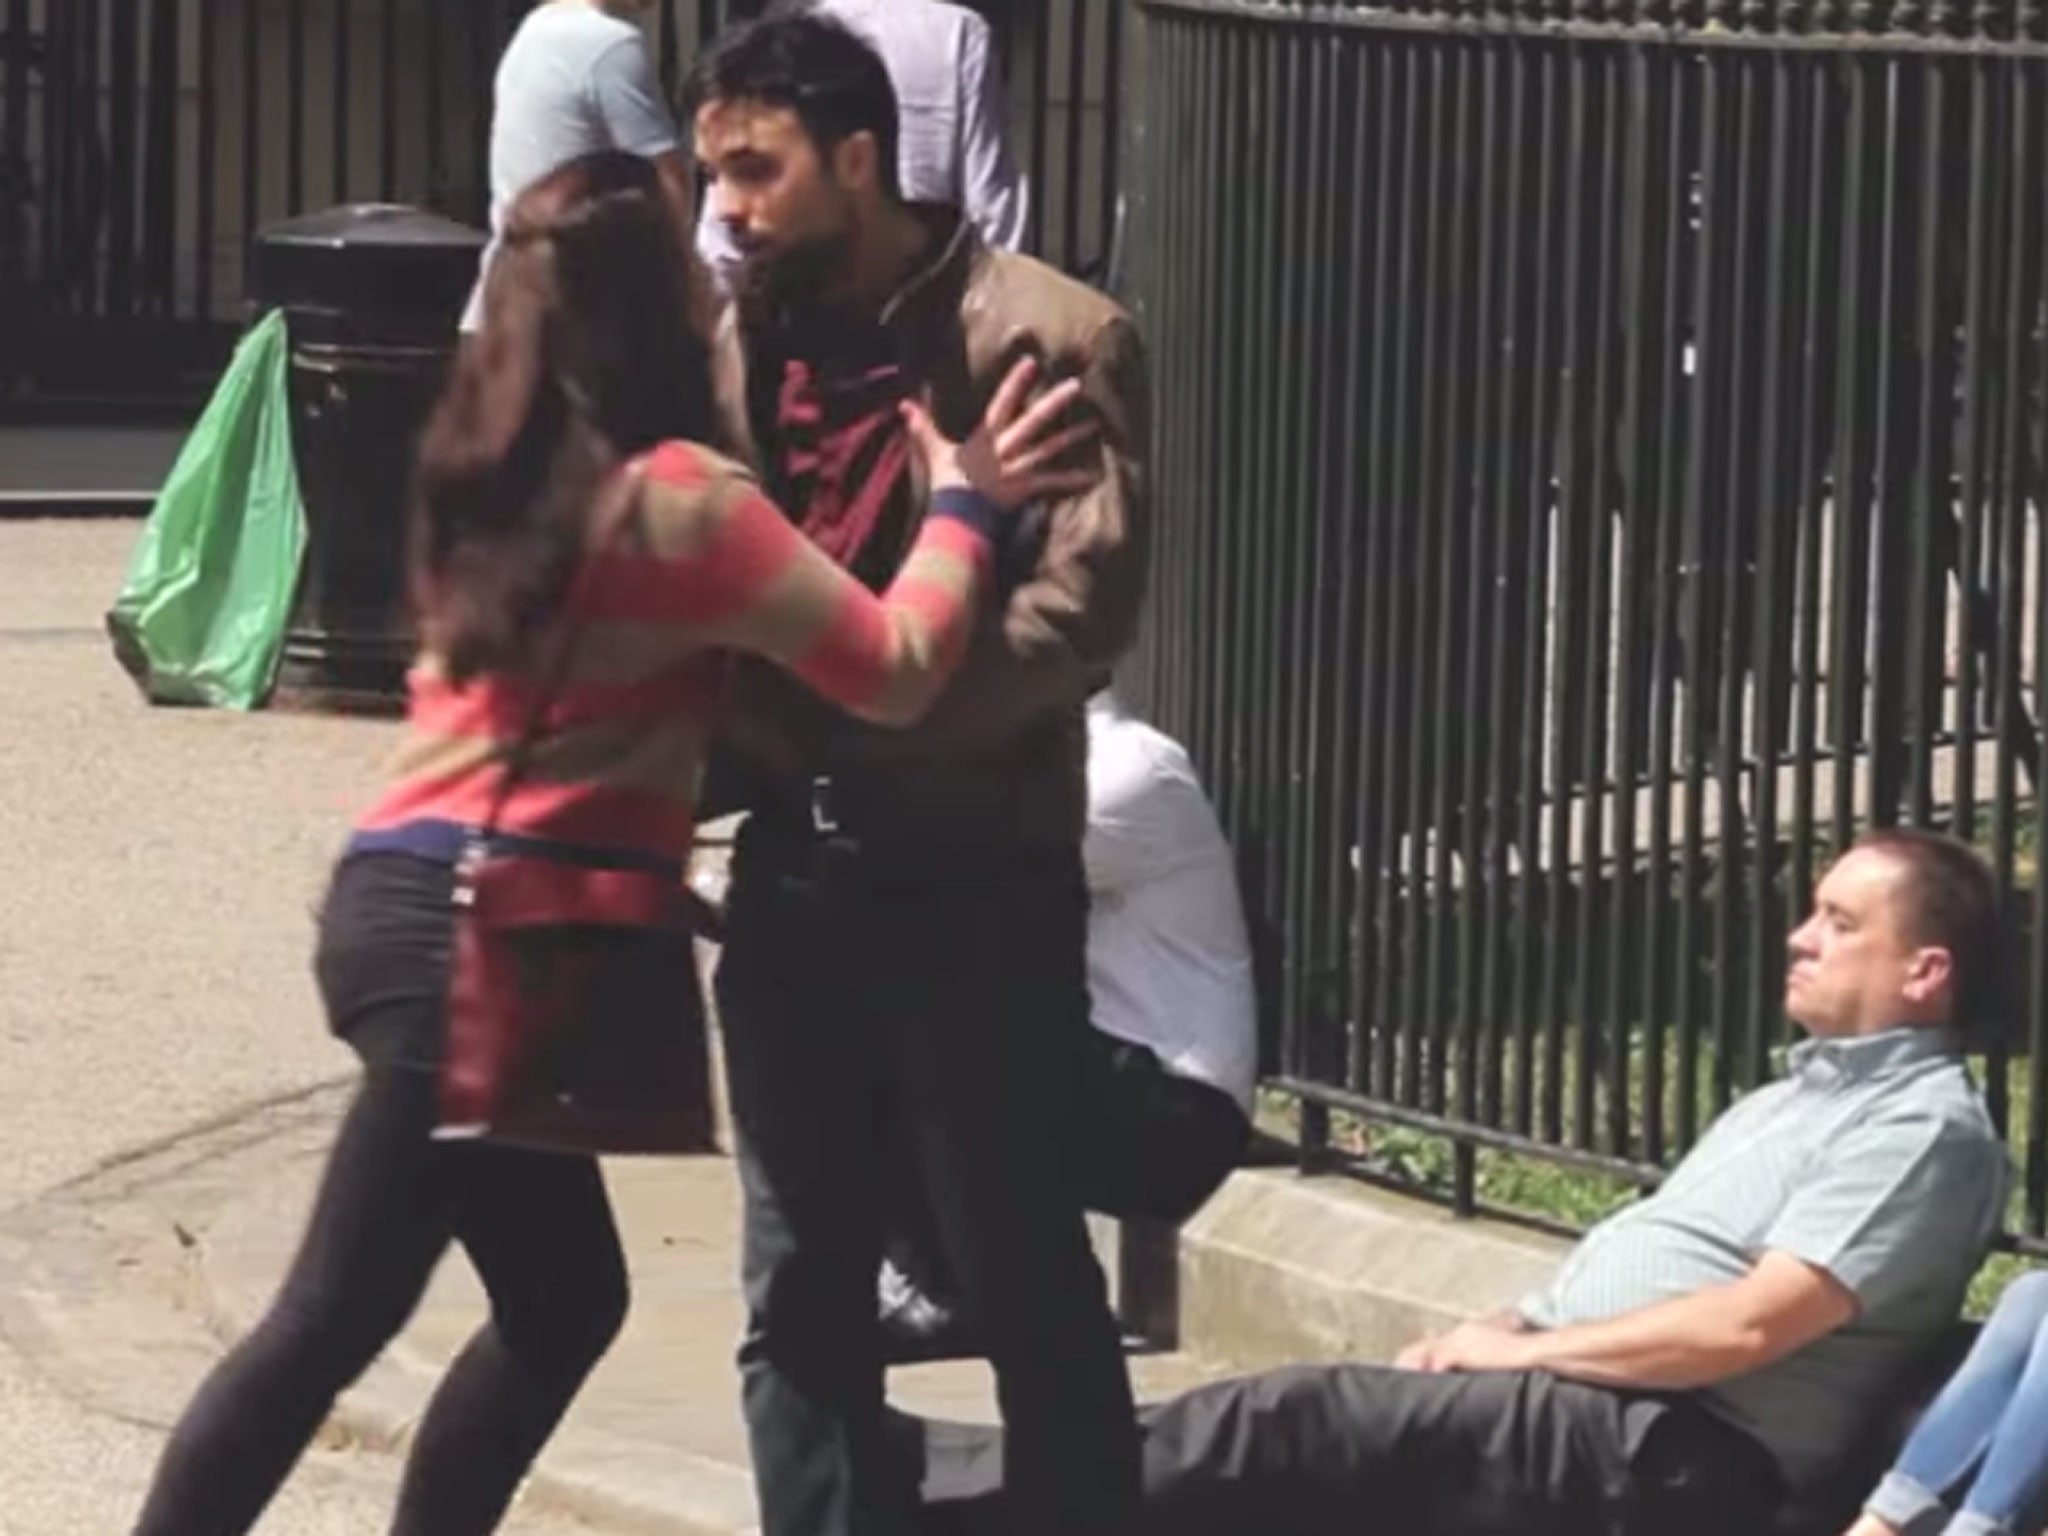 A female attacker pushes her victim against park railings